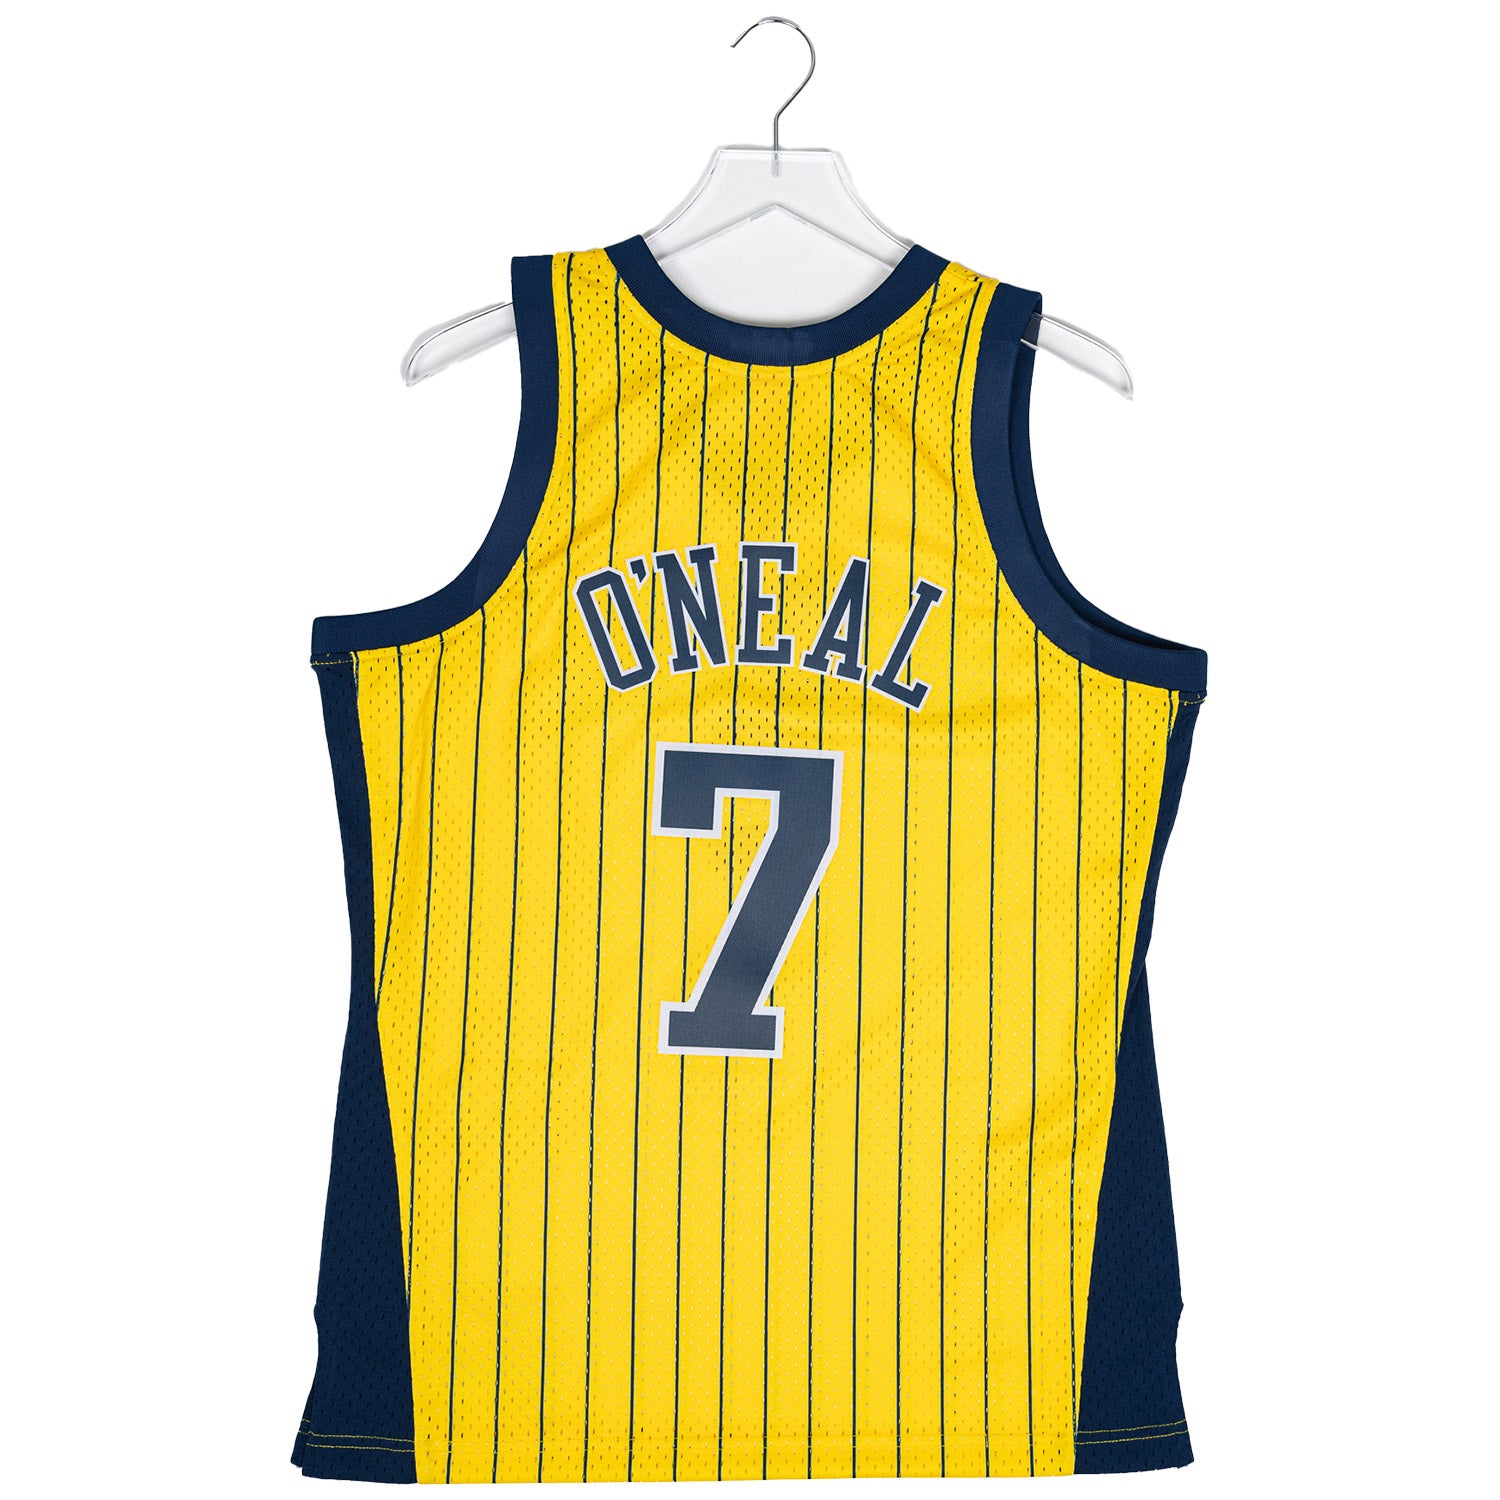 NBA Jerseys for sale in Indianapolis, Indiana